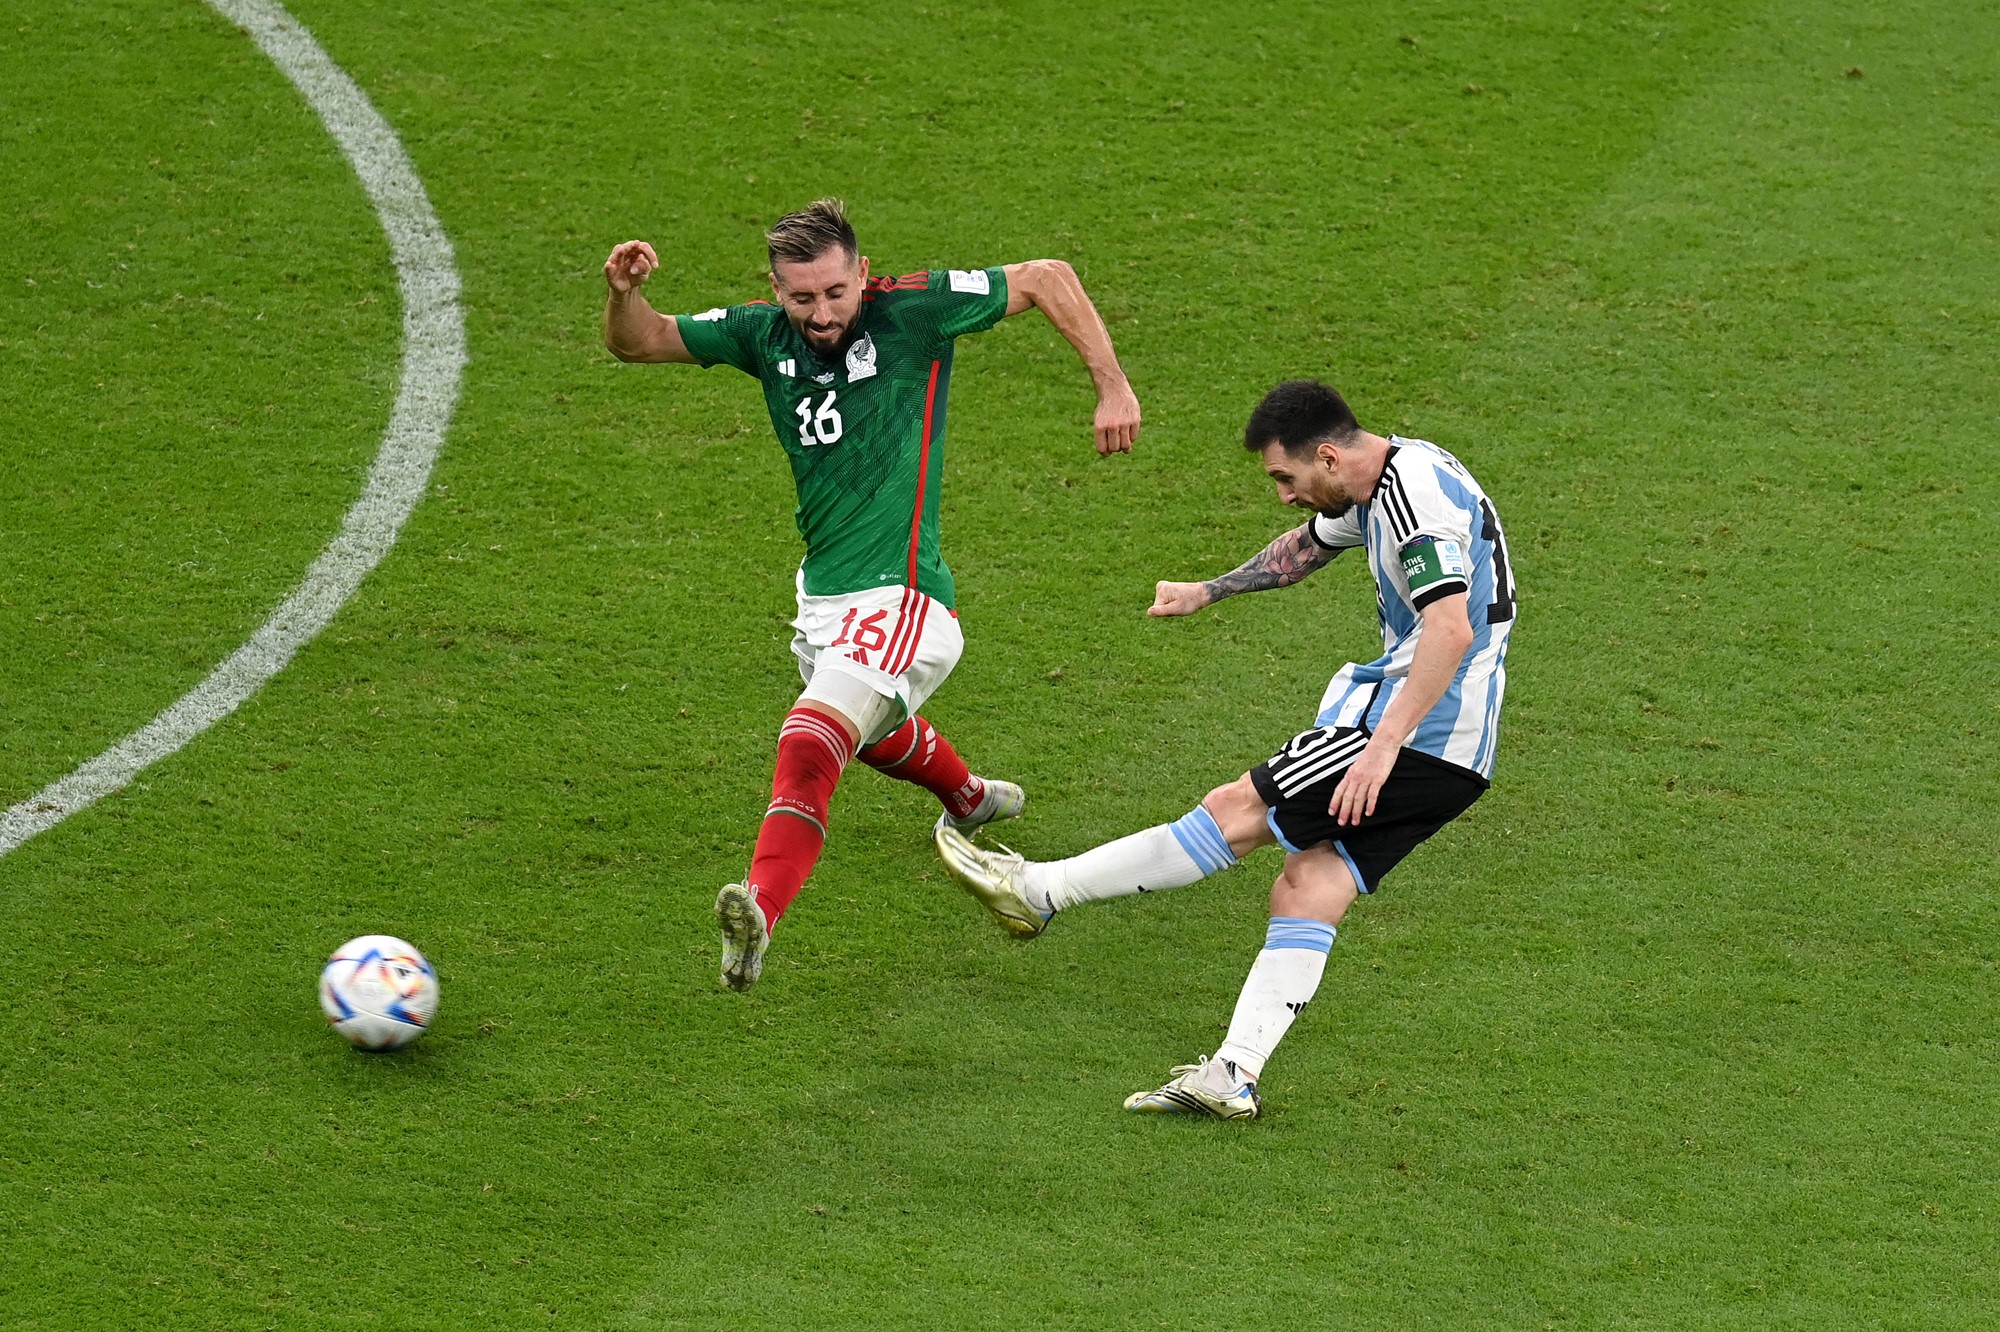 Argentina's Lionel Messi strikes the ball with his left foot for a goal as a Mexican defender makes a lunge.